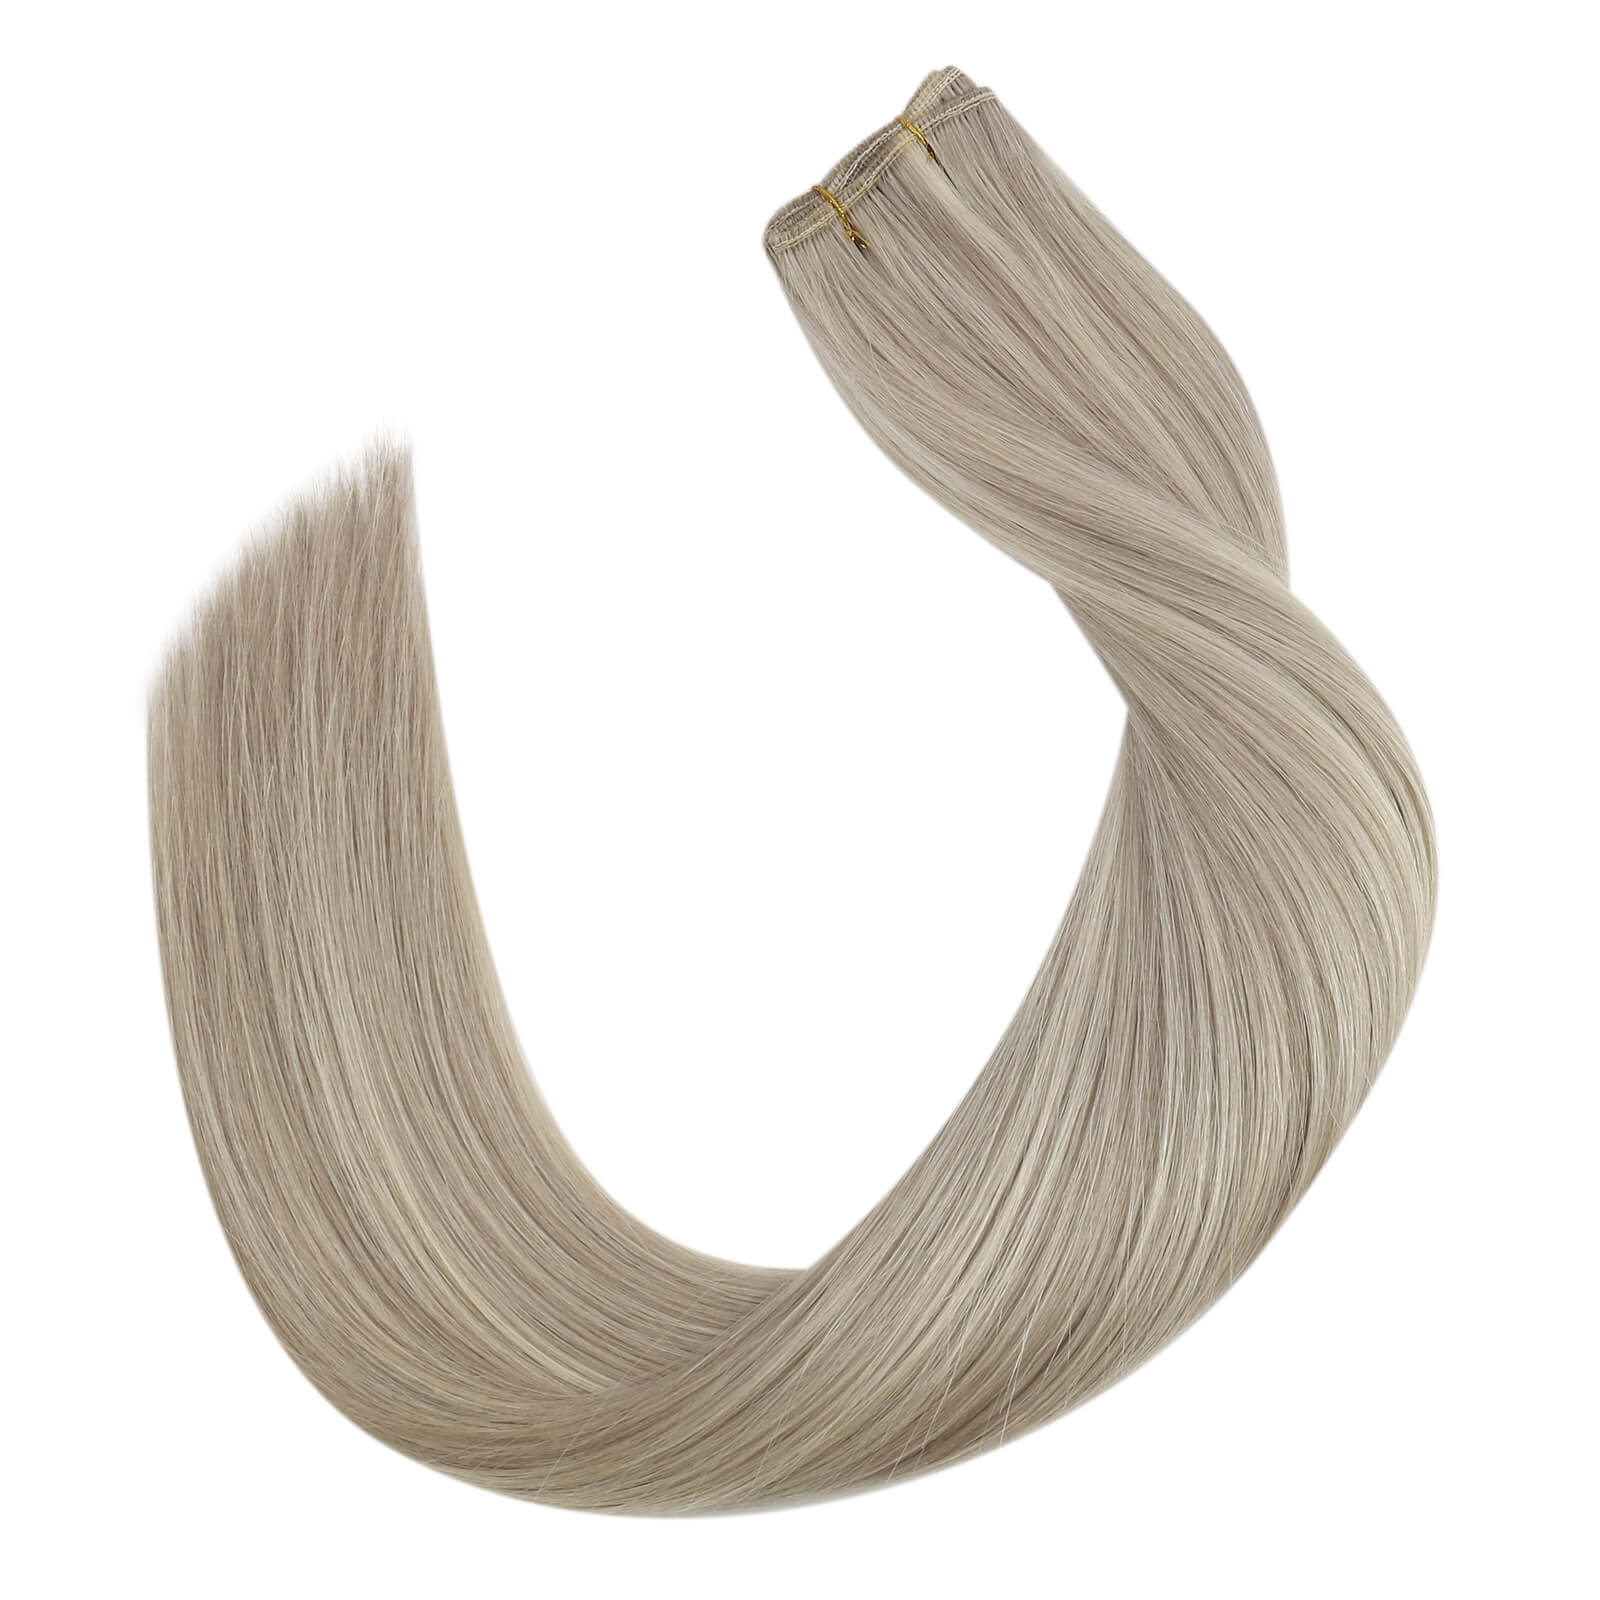 weft hair extensions sew in virgin human hair extensions for salon